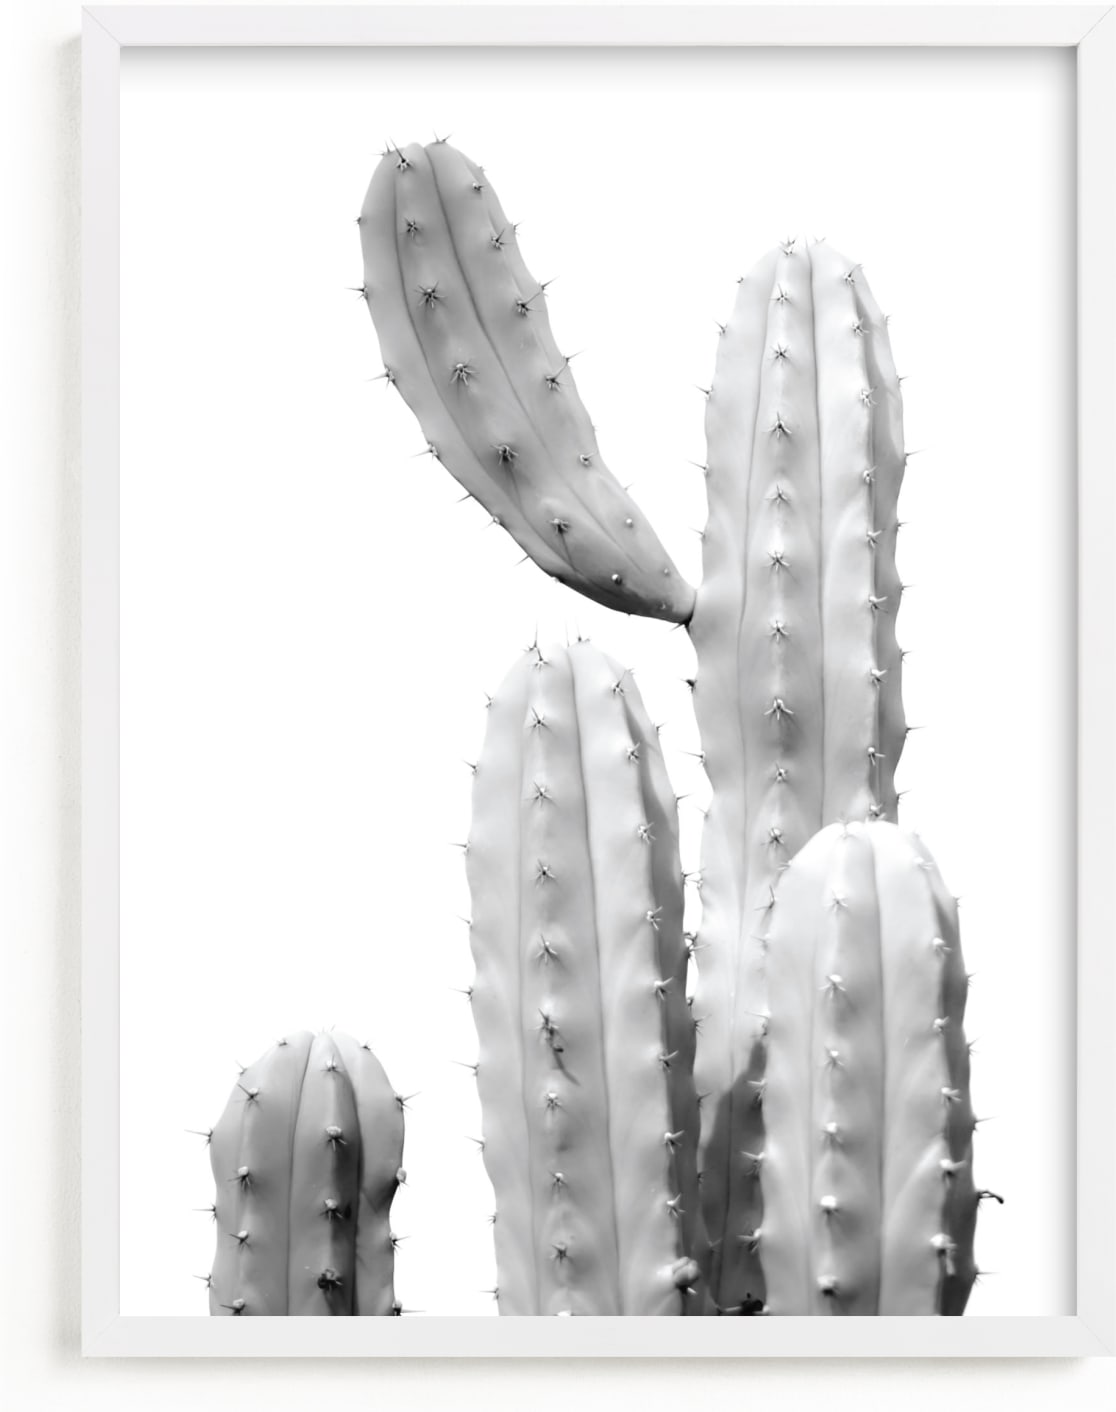 This is a black and white art by Lisa Sundin called Moorten Cactus Study 1.